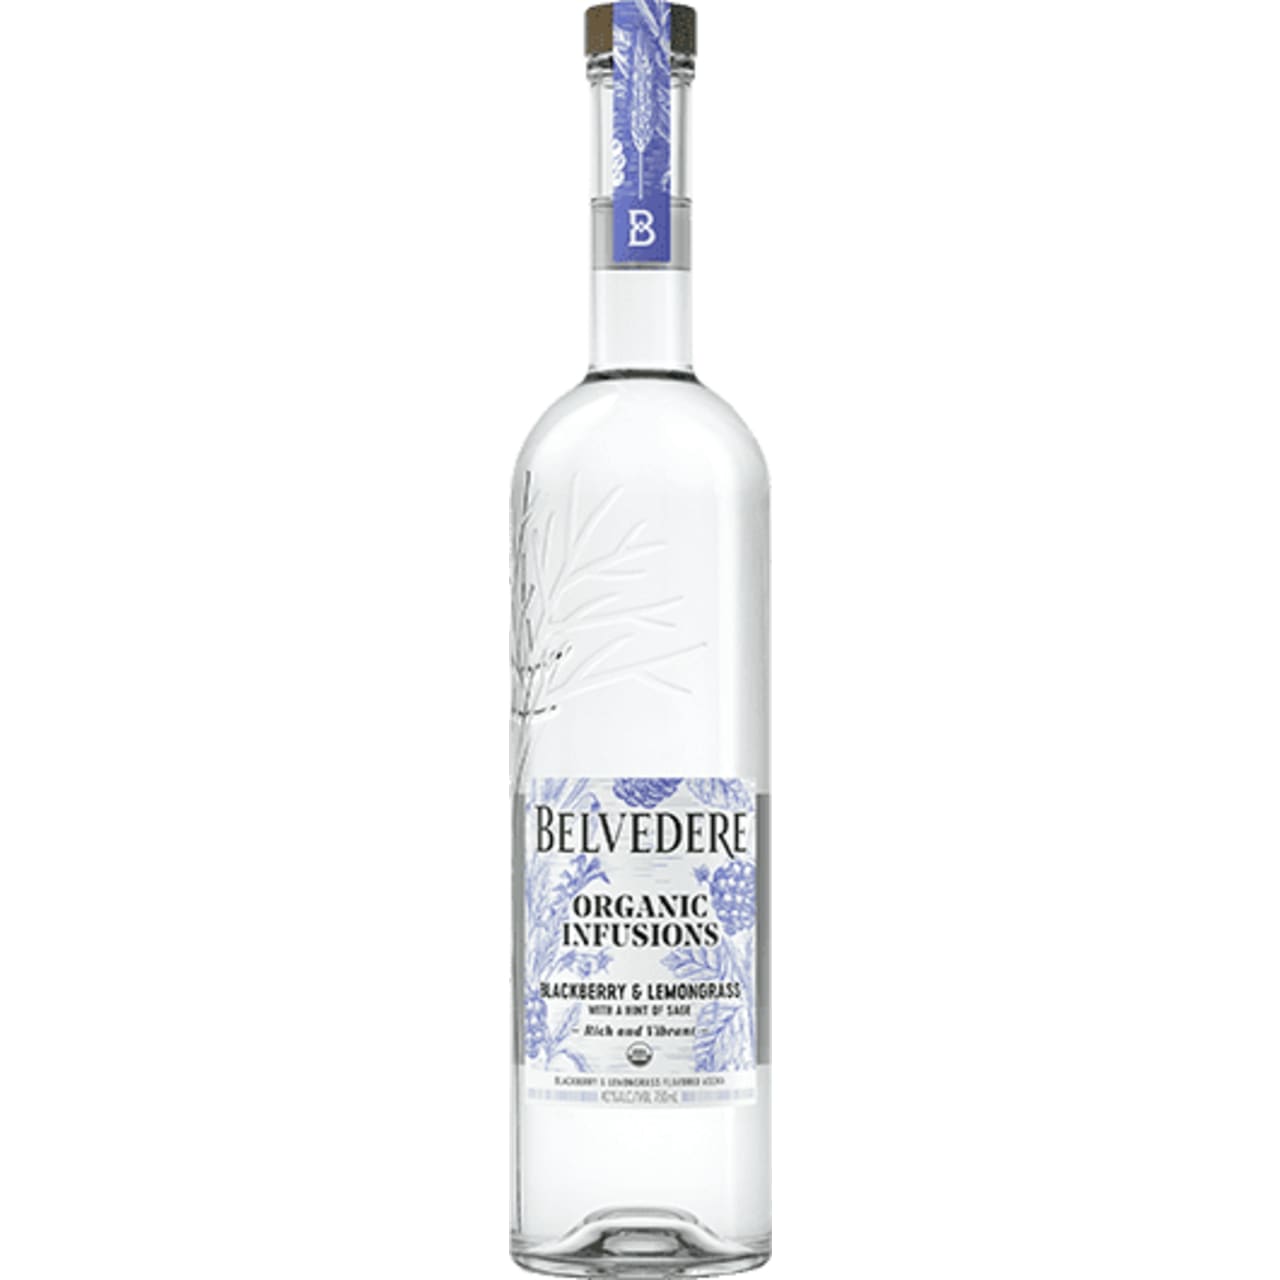 Product Image - Belvedere Organic Infusions Blackberry and Lemongrass